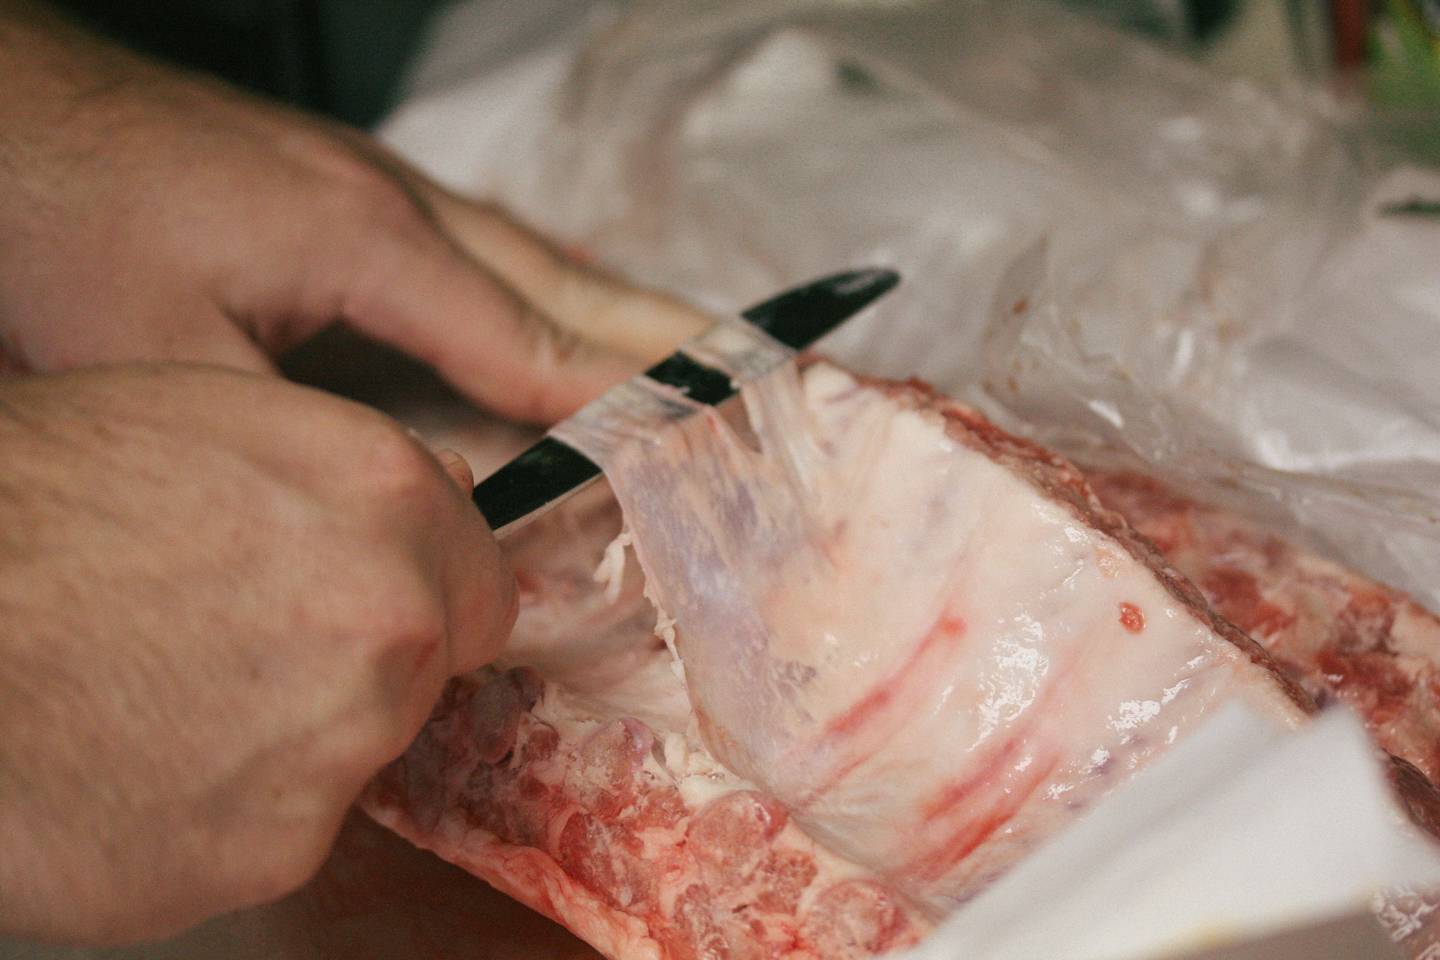 Use a butter knife to remove the membrane